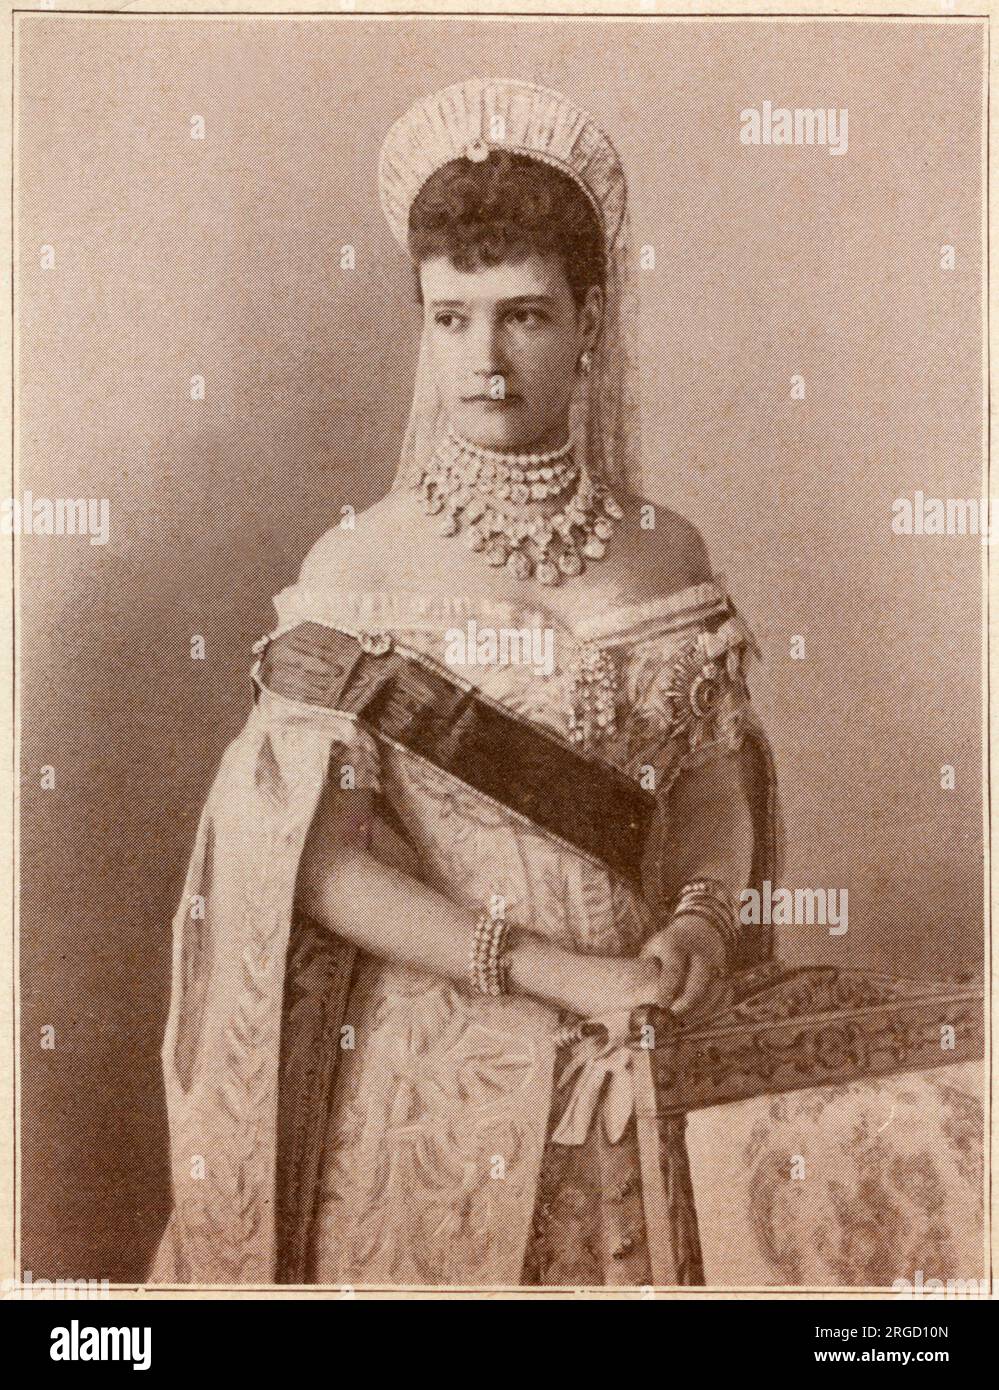 Maria Feodorovna (1847-1928), known before her marriage as Princess Dagmar of Denmark - Empress of Russia from 1881 to 1894 as spouse of Emperor Alexander III. Stock Photo